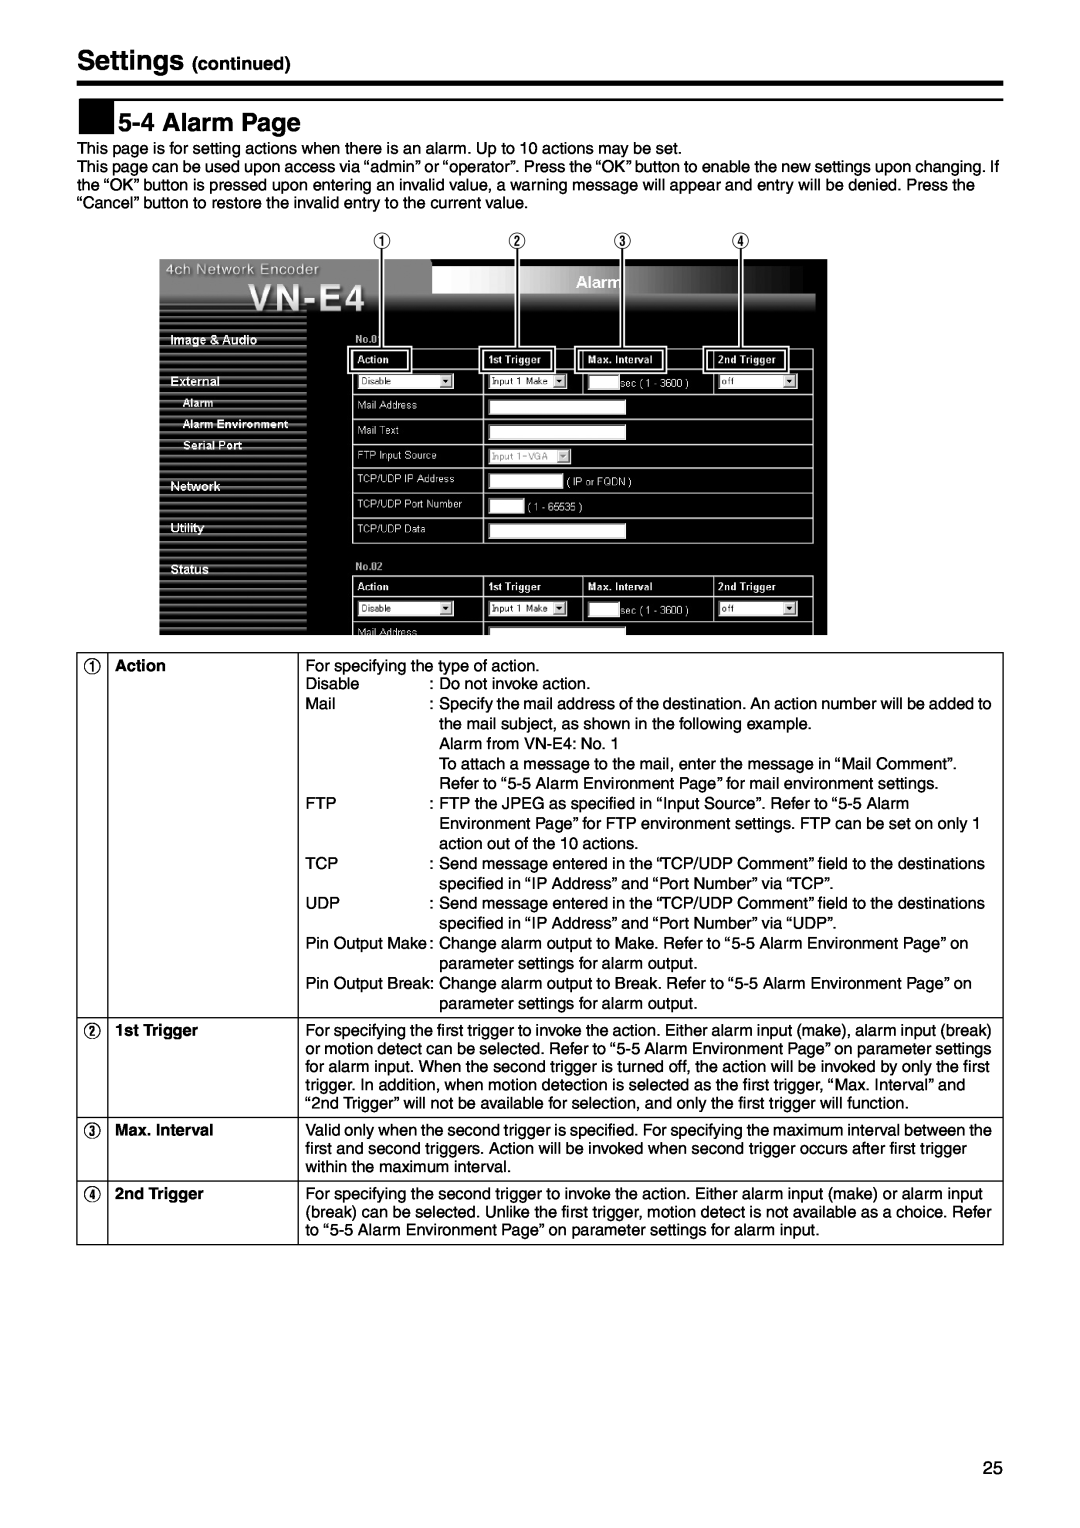 JVC VN-E4 manual  5-4 Alarm Page, Action, 1st Trigger, Max. Interval, 2nd Trigger 